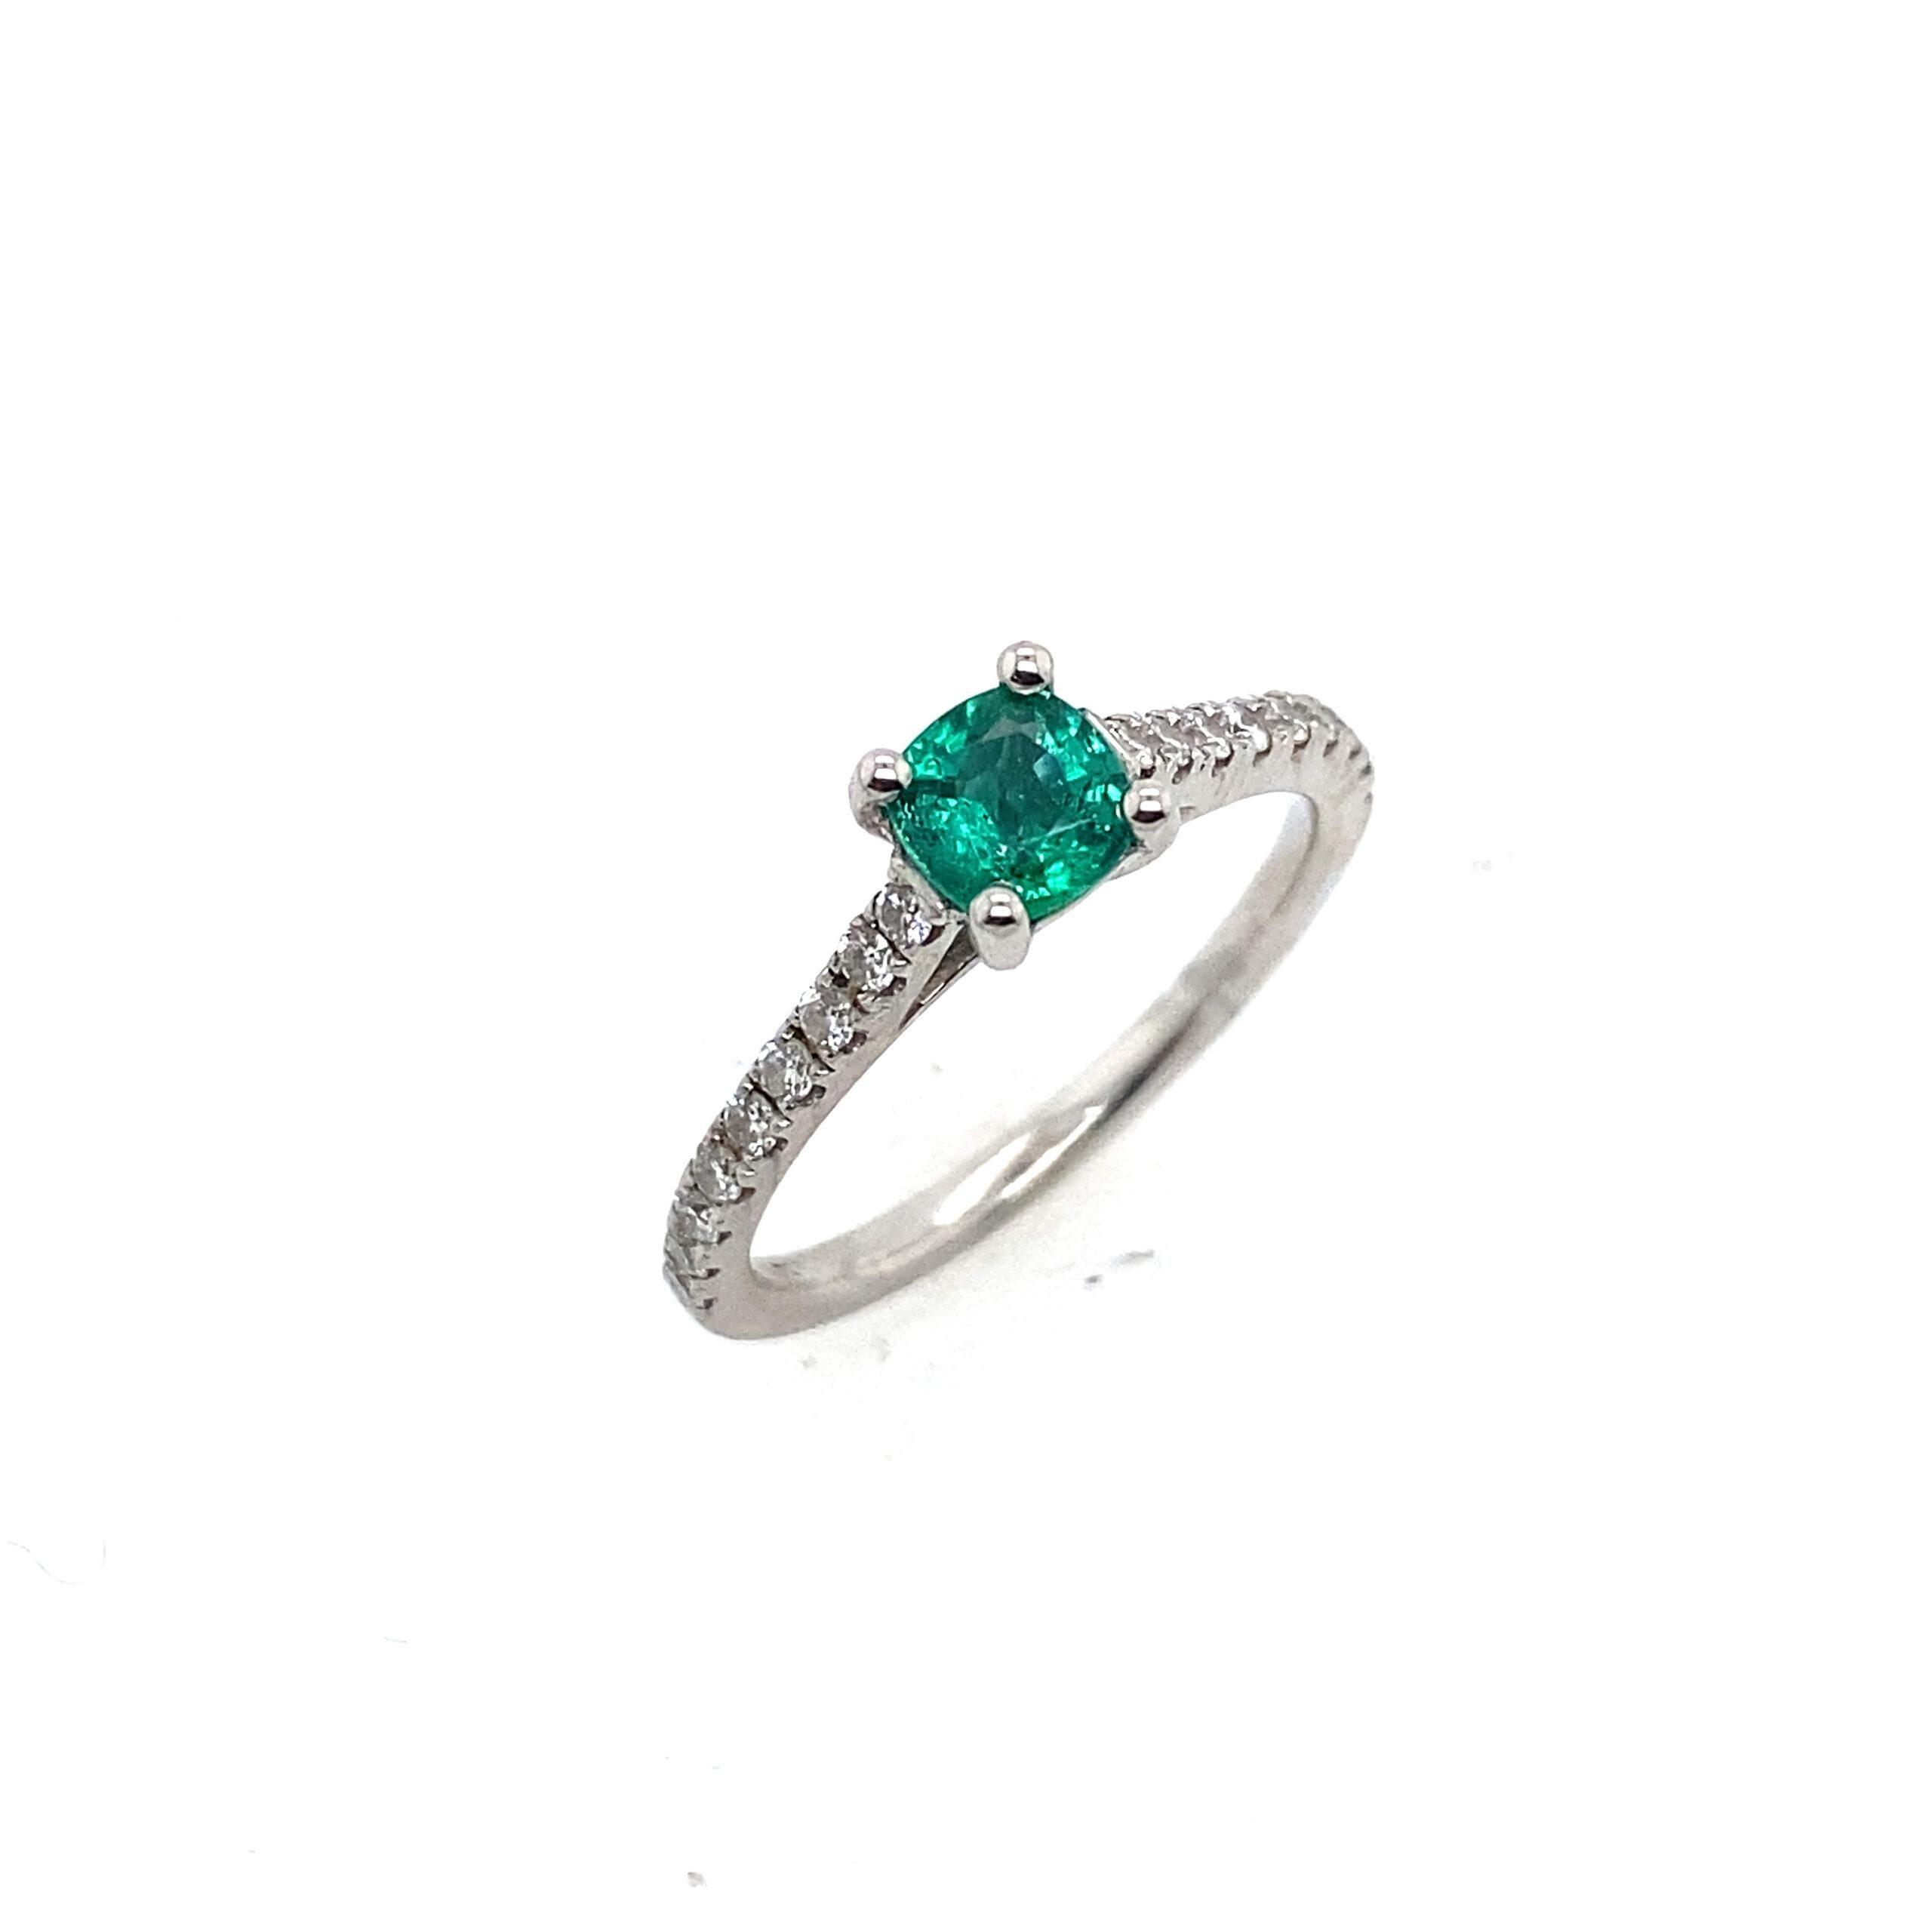 Finest Quality 0.75ct Emerald and 0.30ct Diamond Ring Set In 18ct White Gold
Finest Quality 0.75ct Emerald and Diamond Ring Set in 18ct White Gold. The ring is new Hallmarked as 18k Gold

Additional Information:
Total Diamond Weight: 0.30ct Total